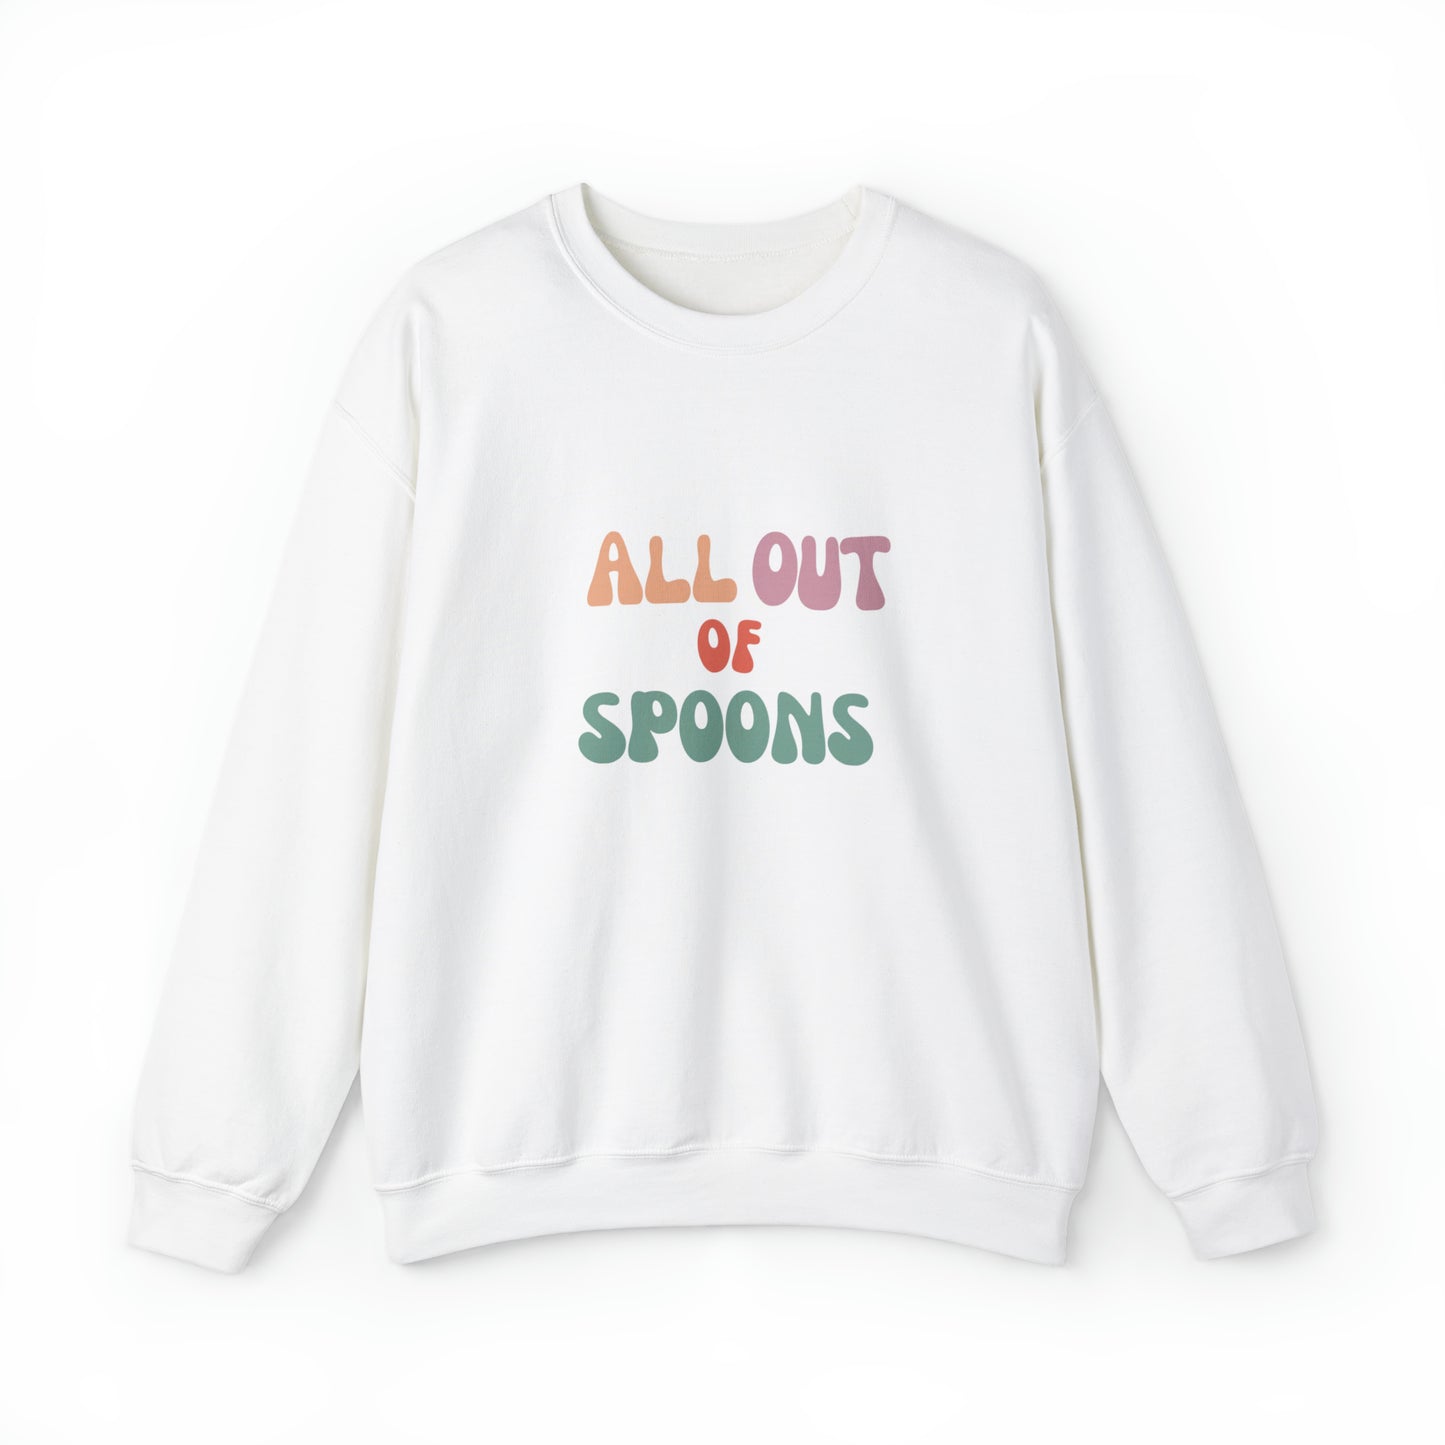 All Out Of Spoons Sweatshirt